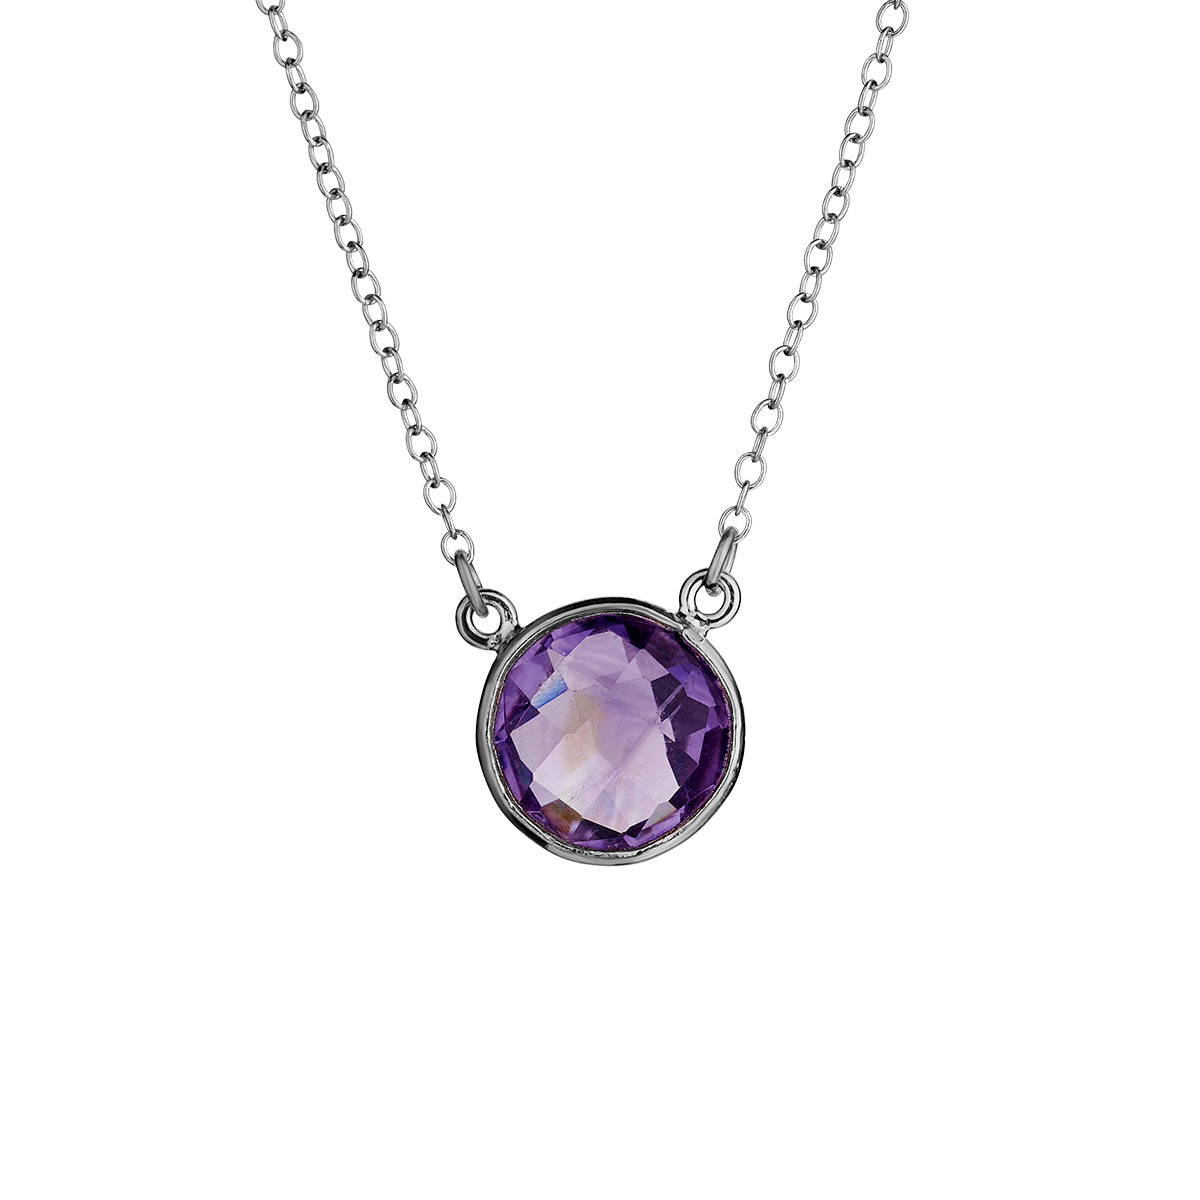 4.00 Carat of Genuine Amethyst "Eclipse" Pendant  Sterling Silver. Necklaces and Pendants. Griffin Jewellery Designs. 